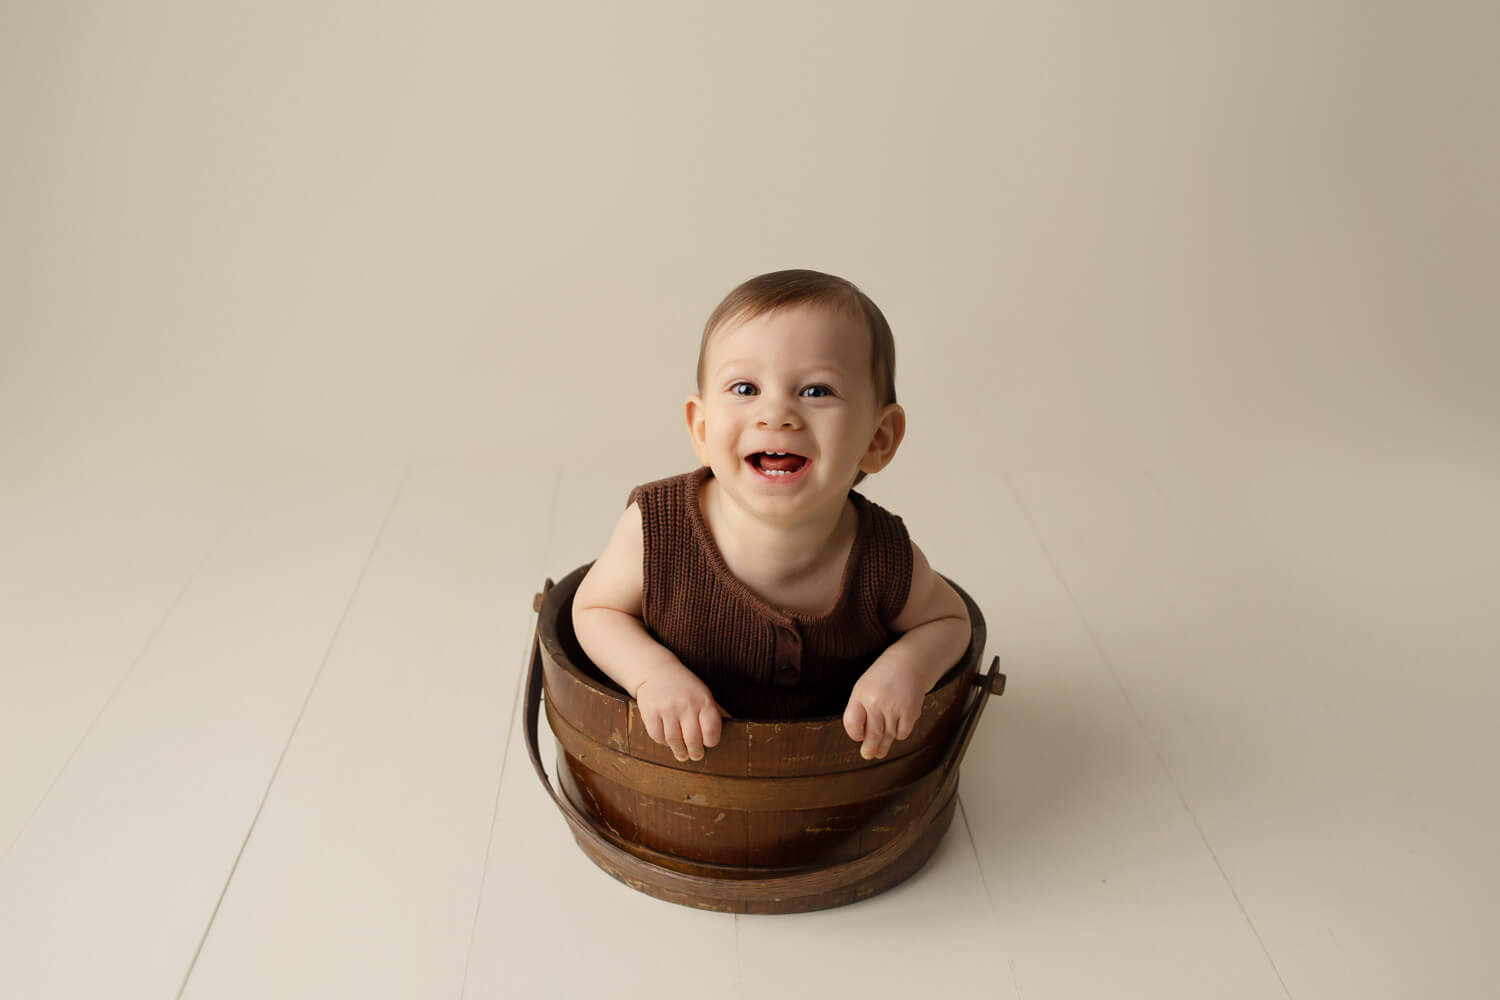 9 month old baby photoshoot in a bucket